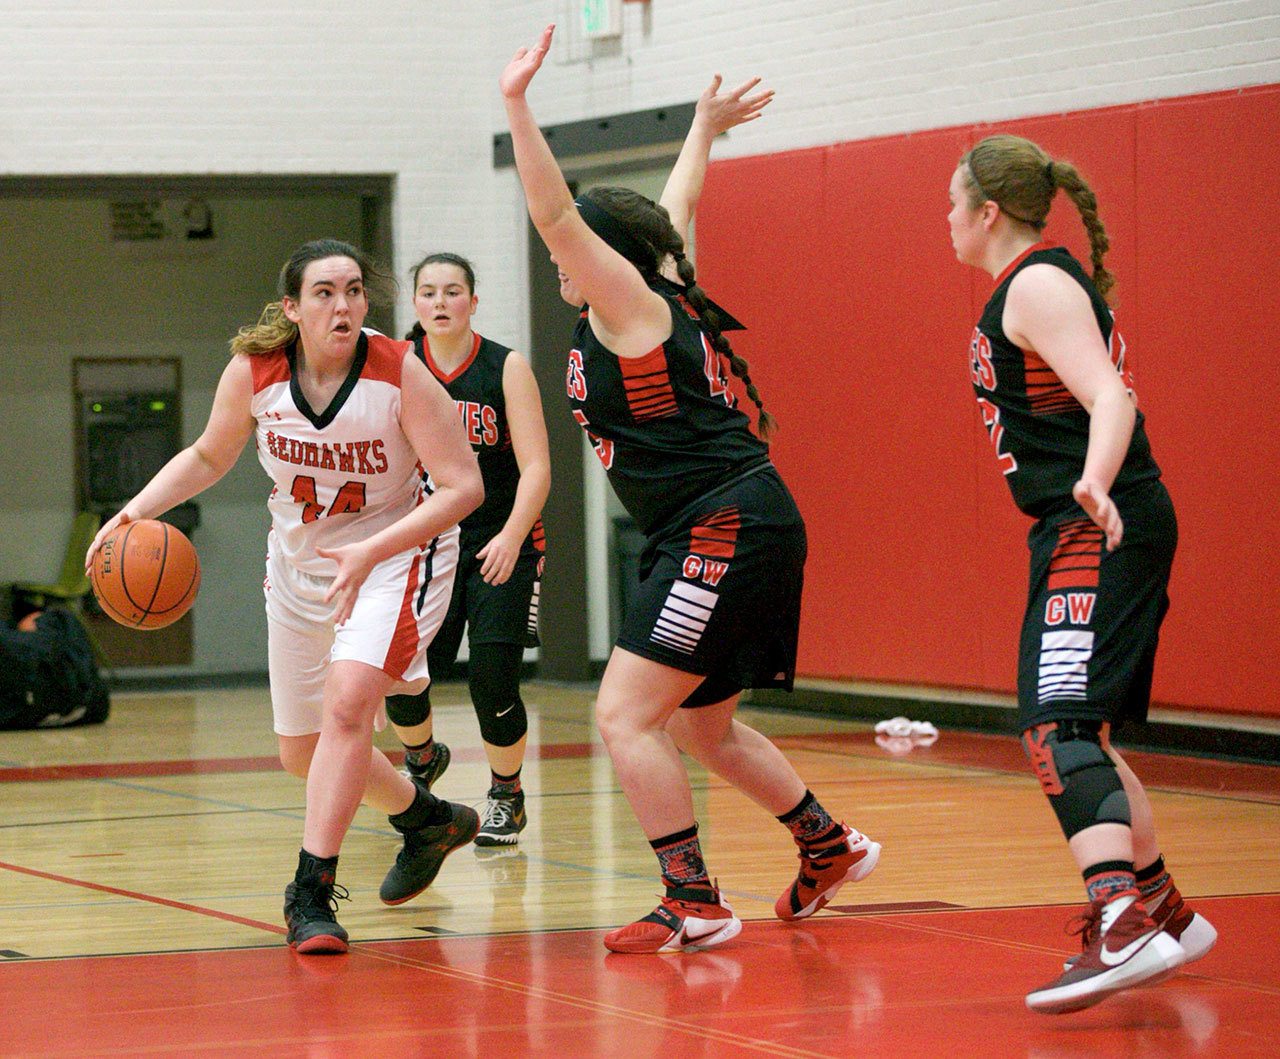 Steve Mullensky/for Peninsula Daily News Jenna Carson with the Redhawks stares down her Coupeville opponents as she gets set to drive for the basket during Olympic League action in Port Townsend on Tuesday.